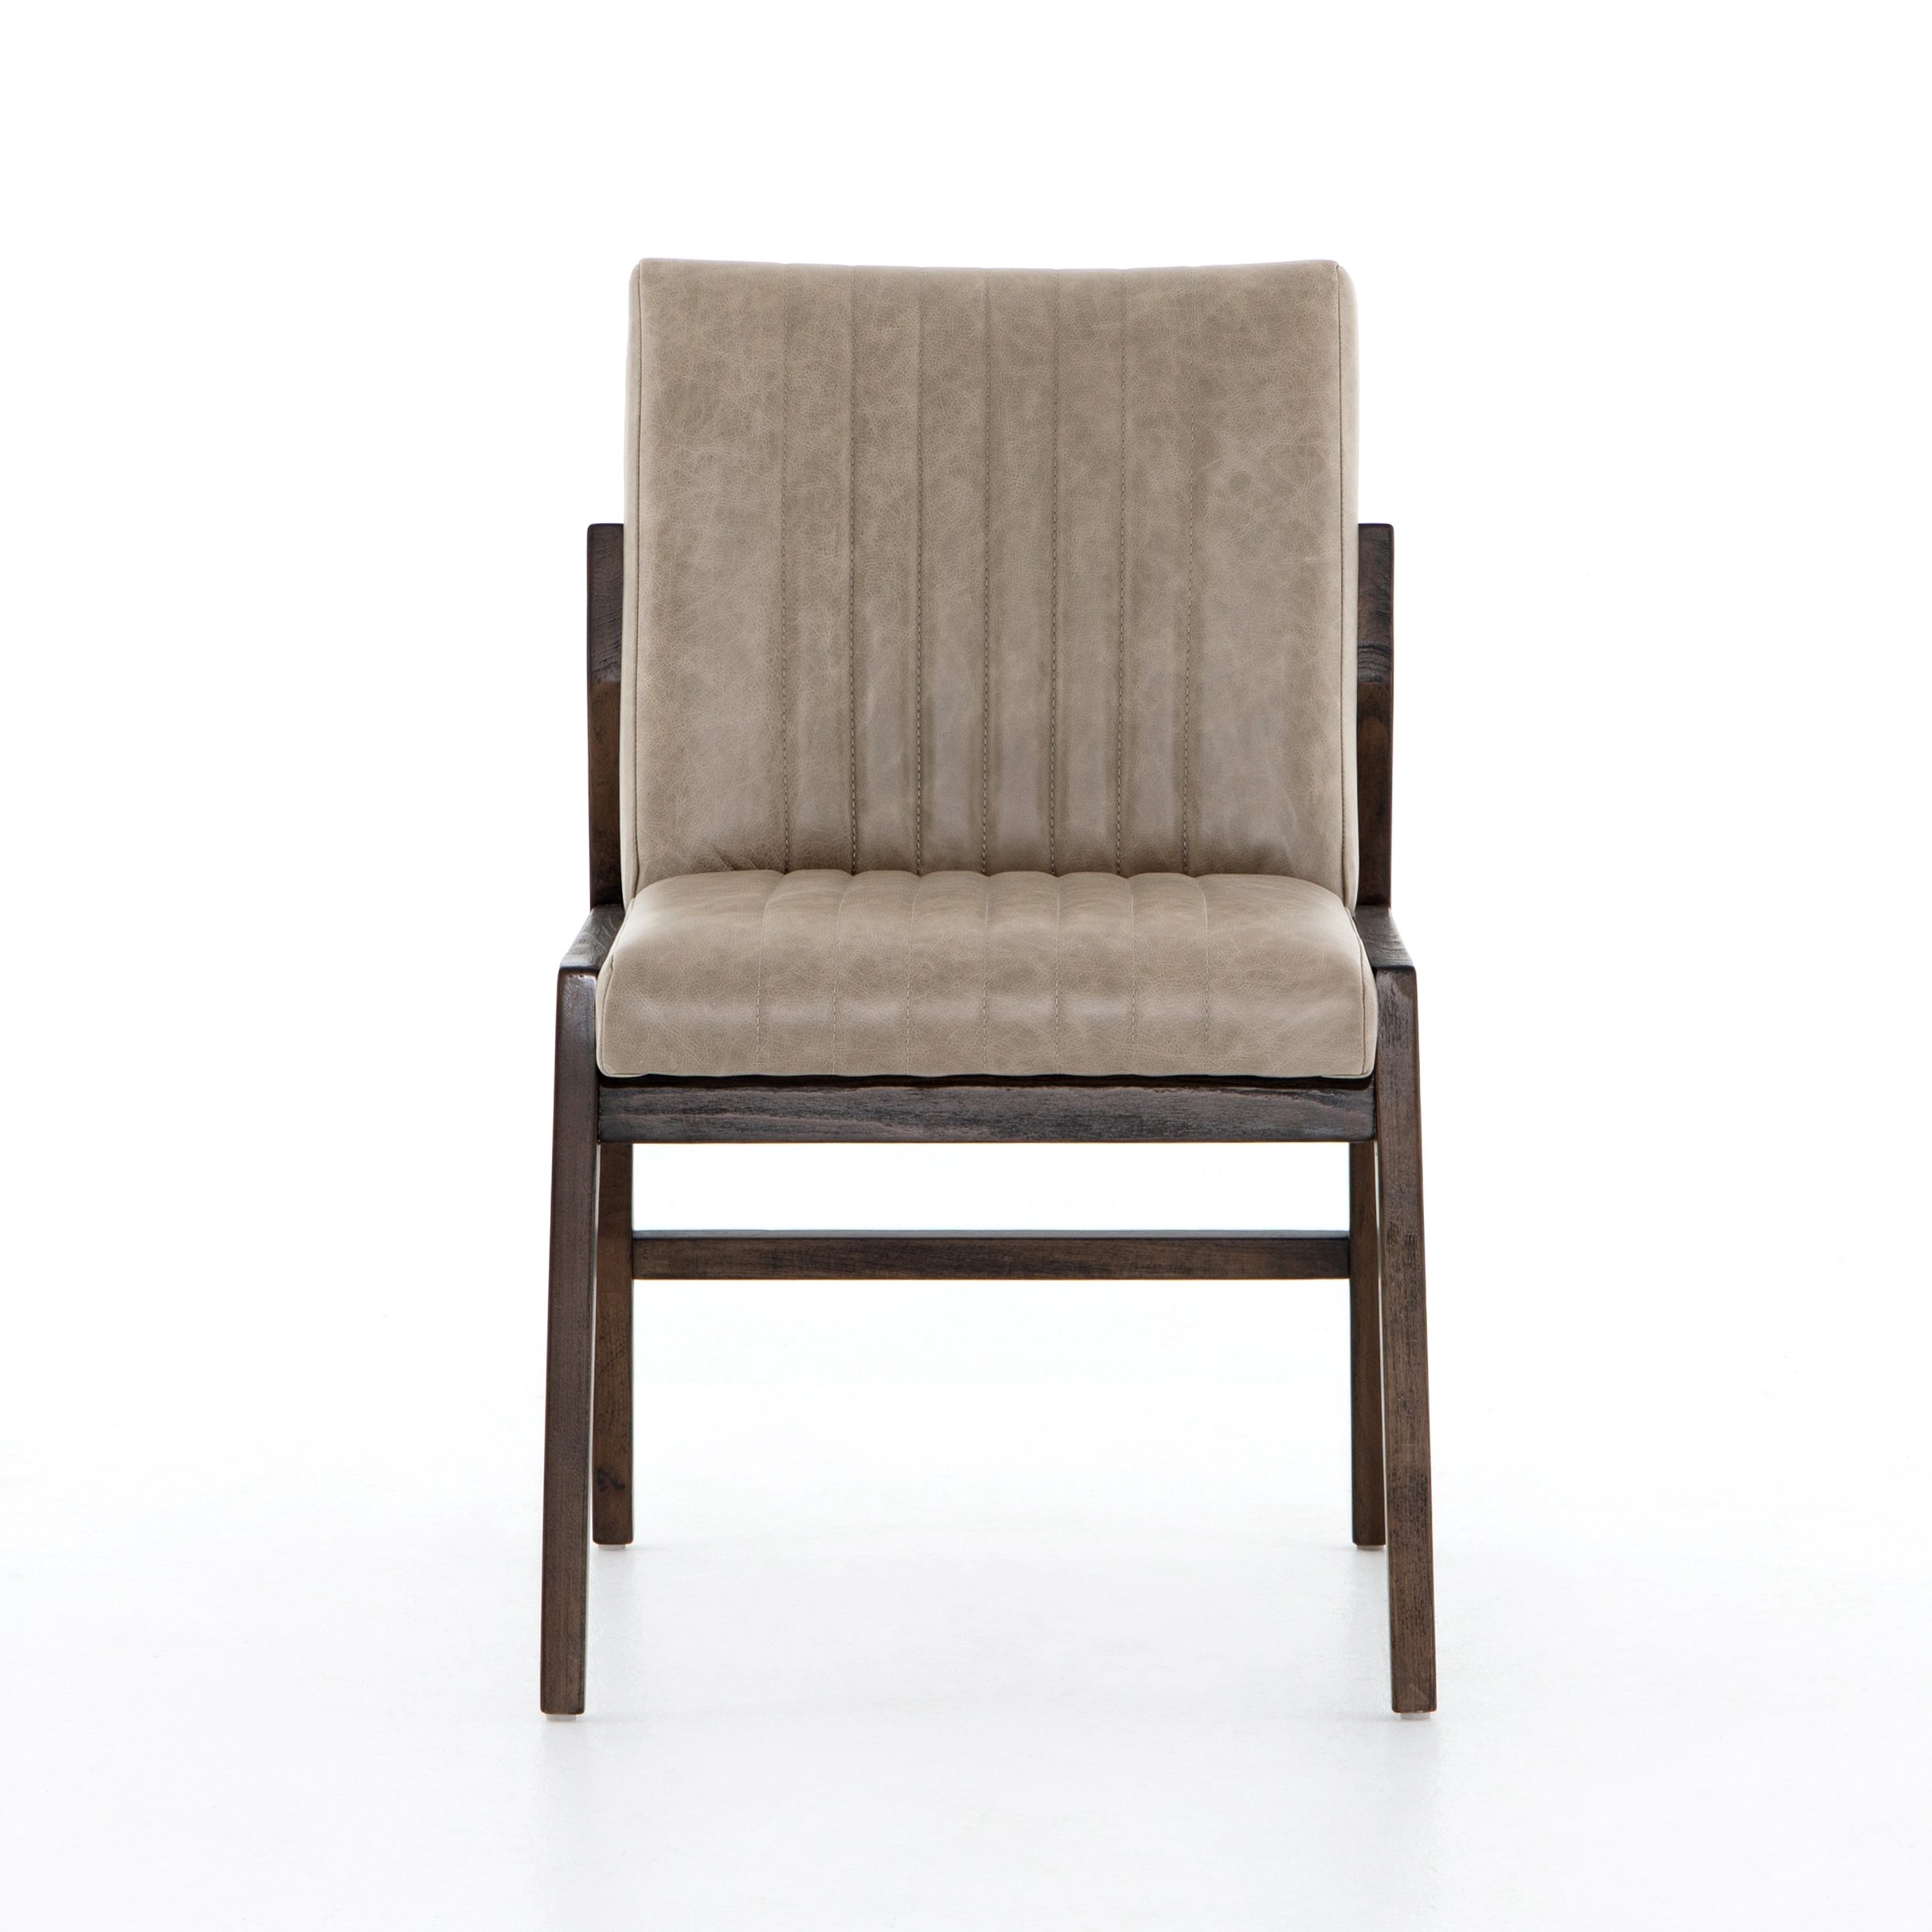 Alice Dining Chair-Sonoma Grey - Image 3